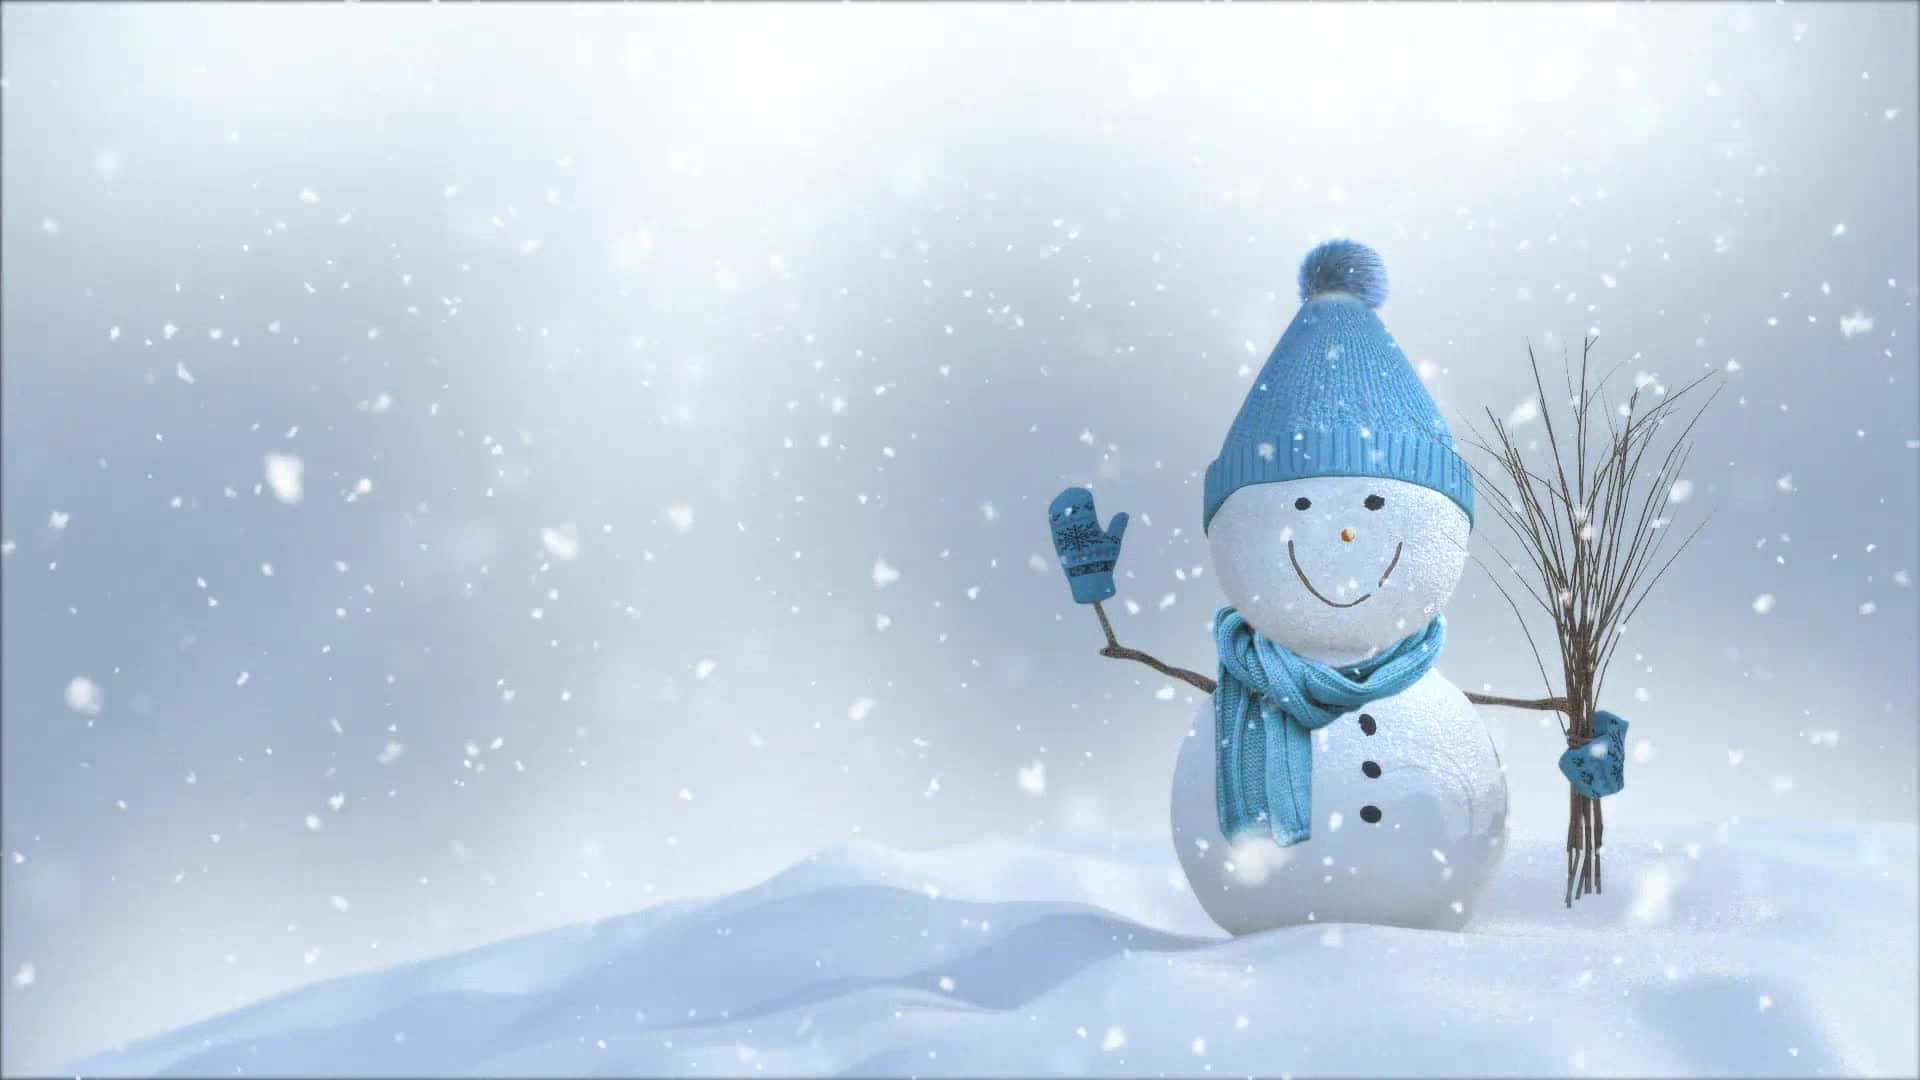 a snowman is holding a broom in the snow